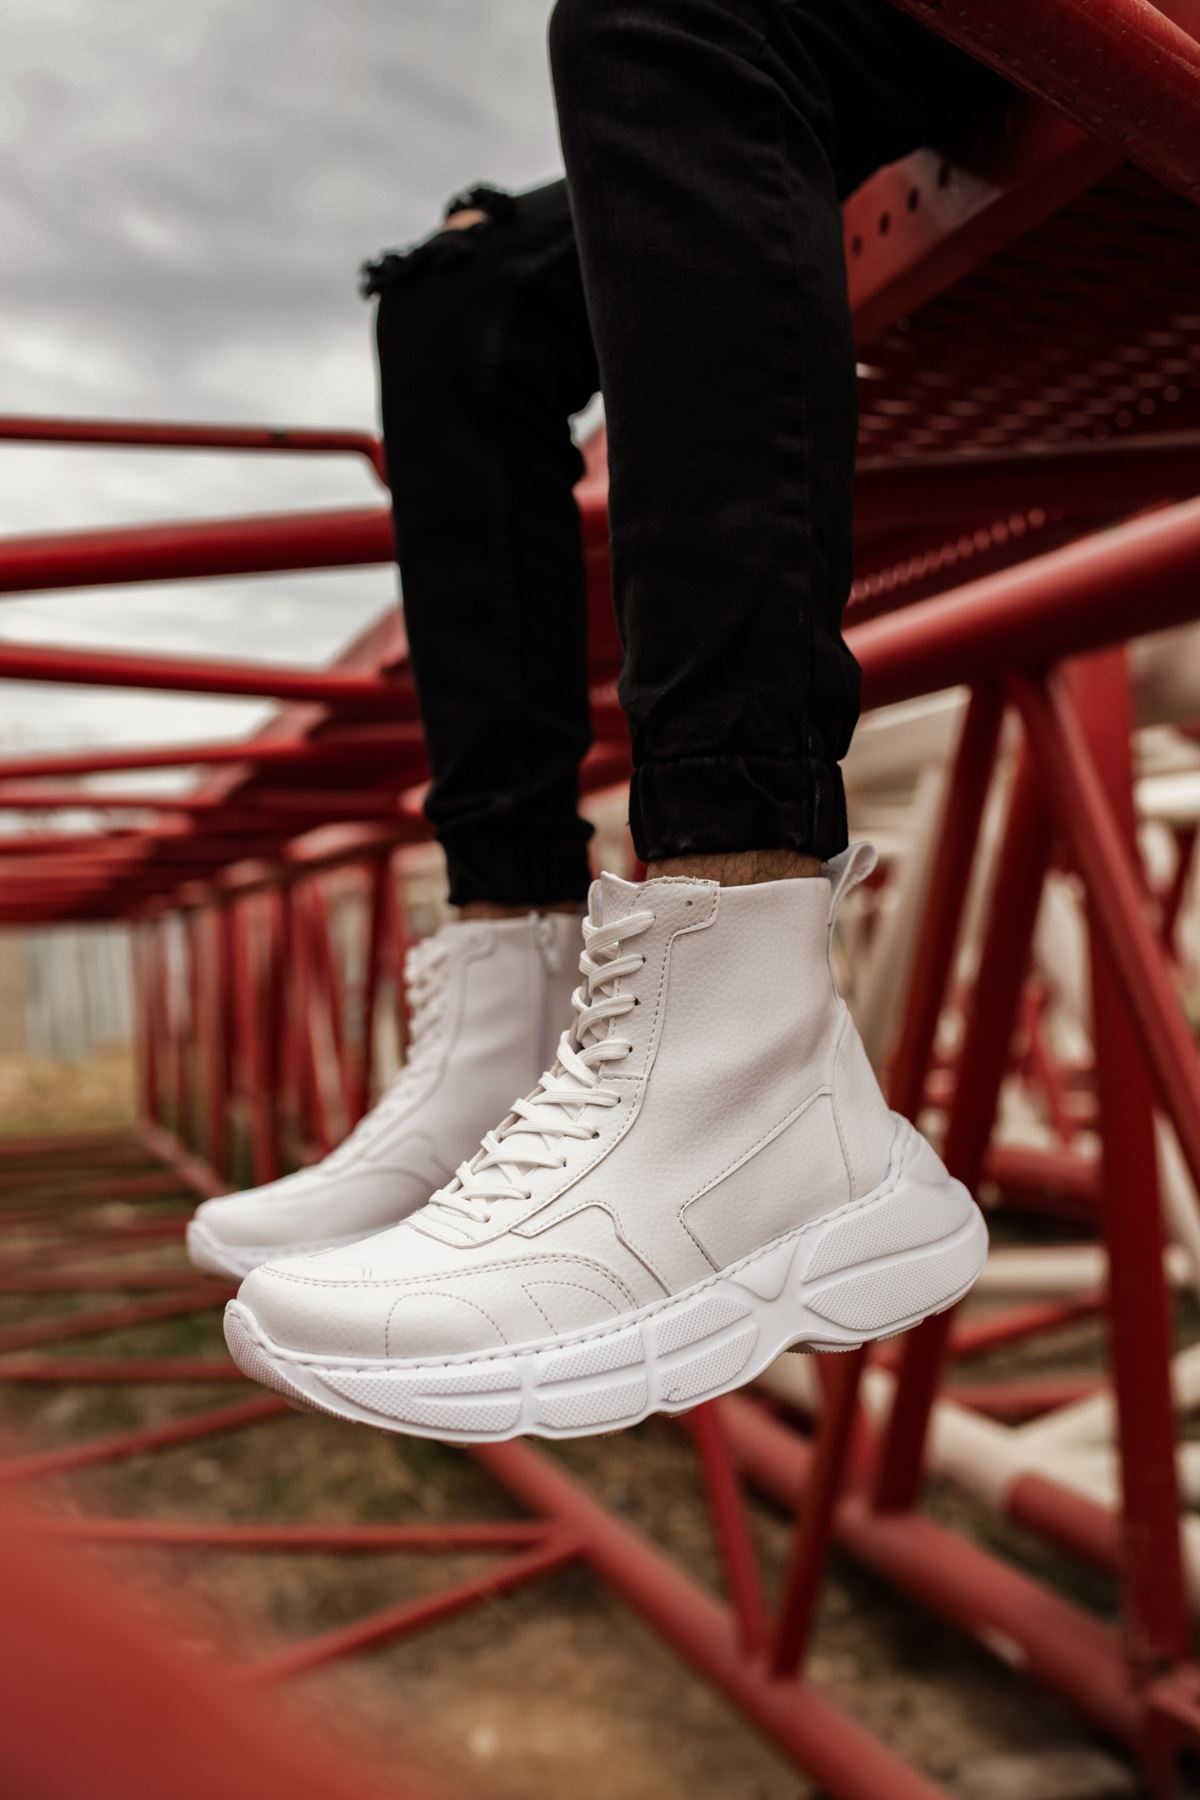 Chekich Men's Boots White Color Artificial Leather Lace Up Spring Autumn Seasons Comfortable Outdoor Shoes Solid Fashion 2021 Snow Big Sizes Winter Sneakers Ankle Basic Footwear Walking Air New Sale CH077 V1